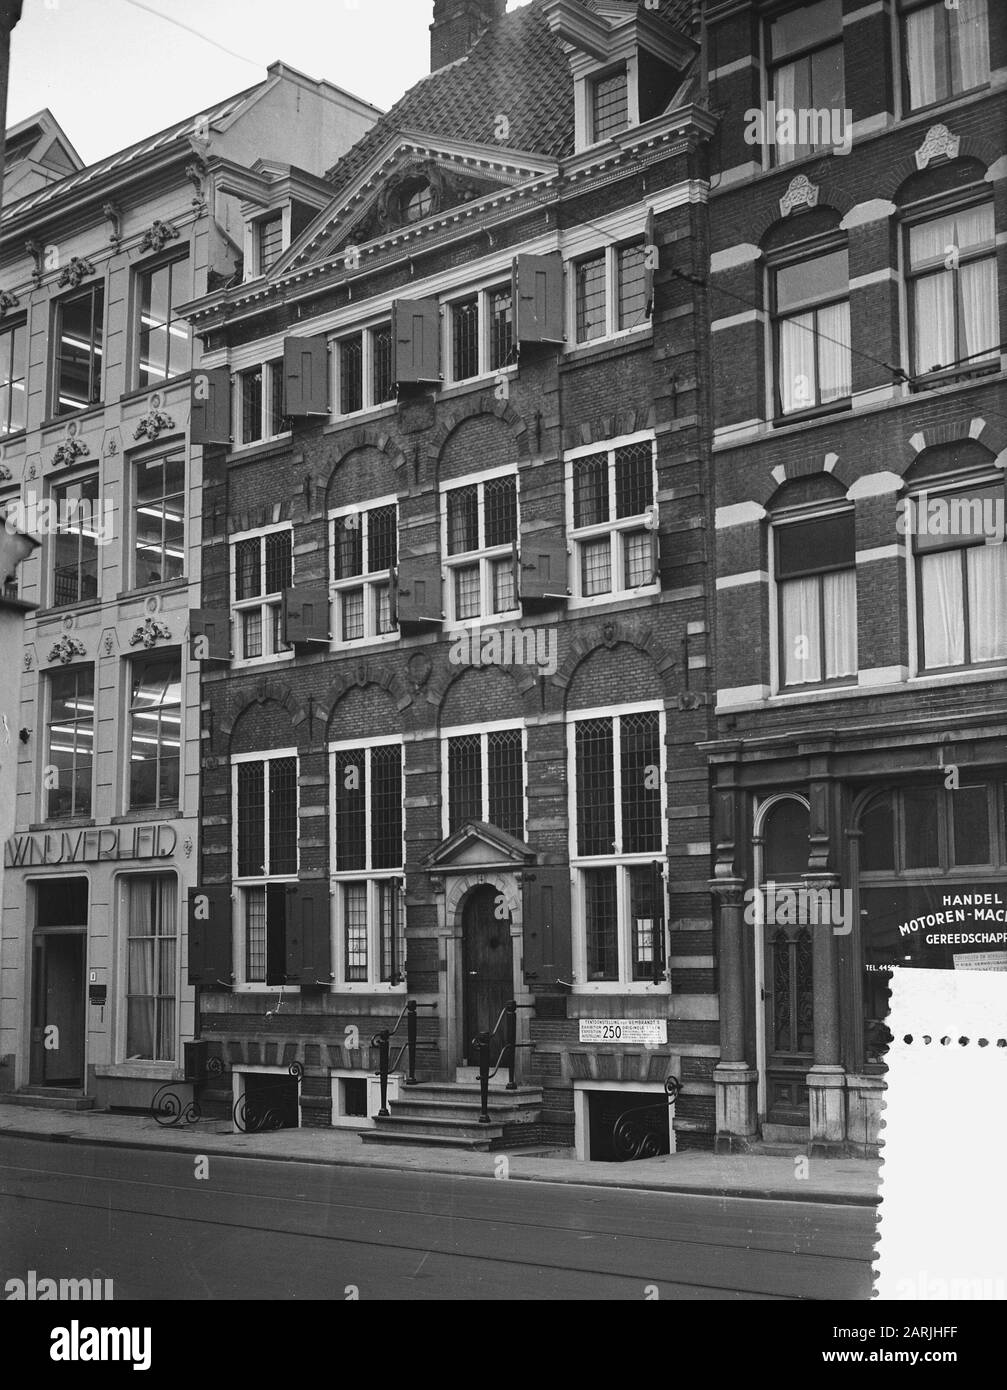 Townscapes, Rembrandthuis Date: December 14, 1955 Keywords: Cityscapes Institution name: Rembrandthuis Stock Photo